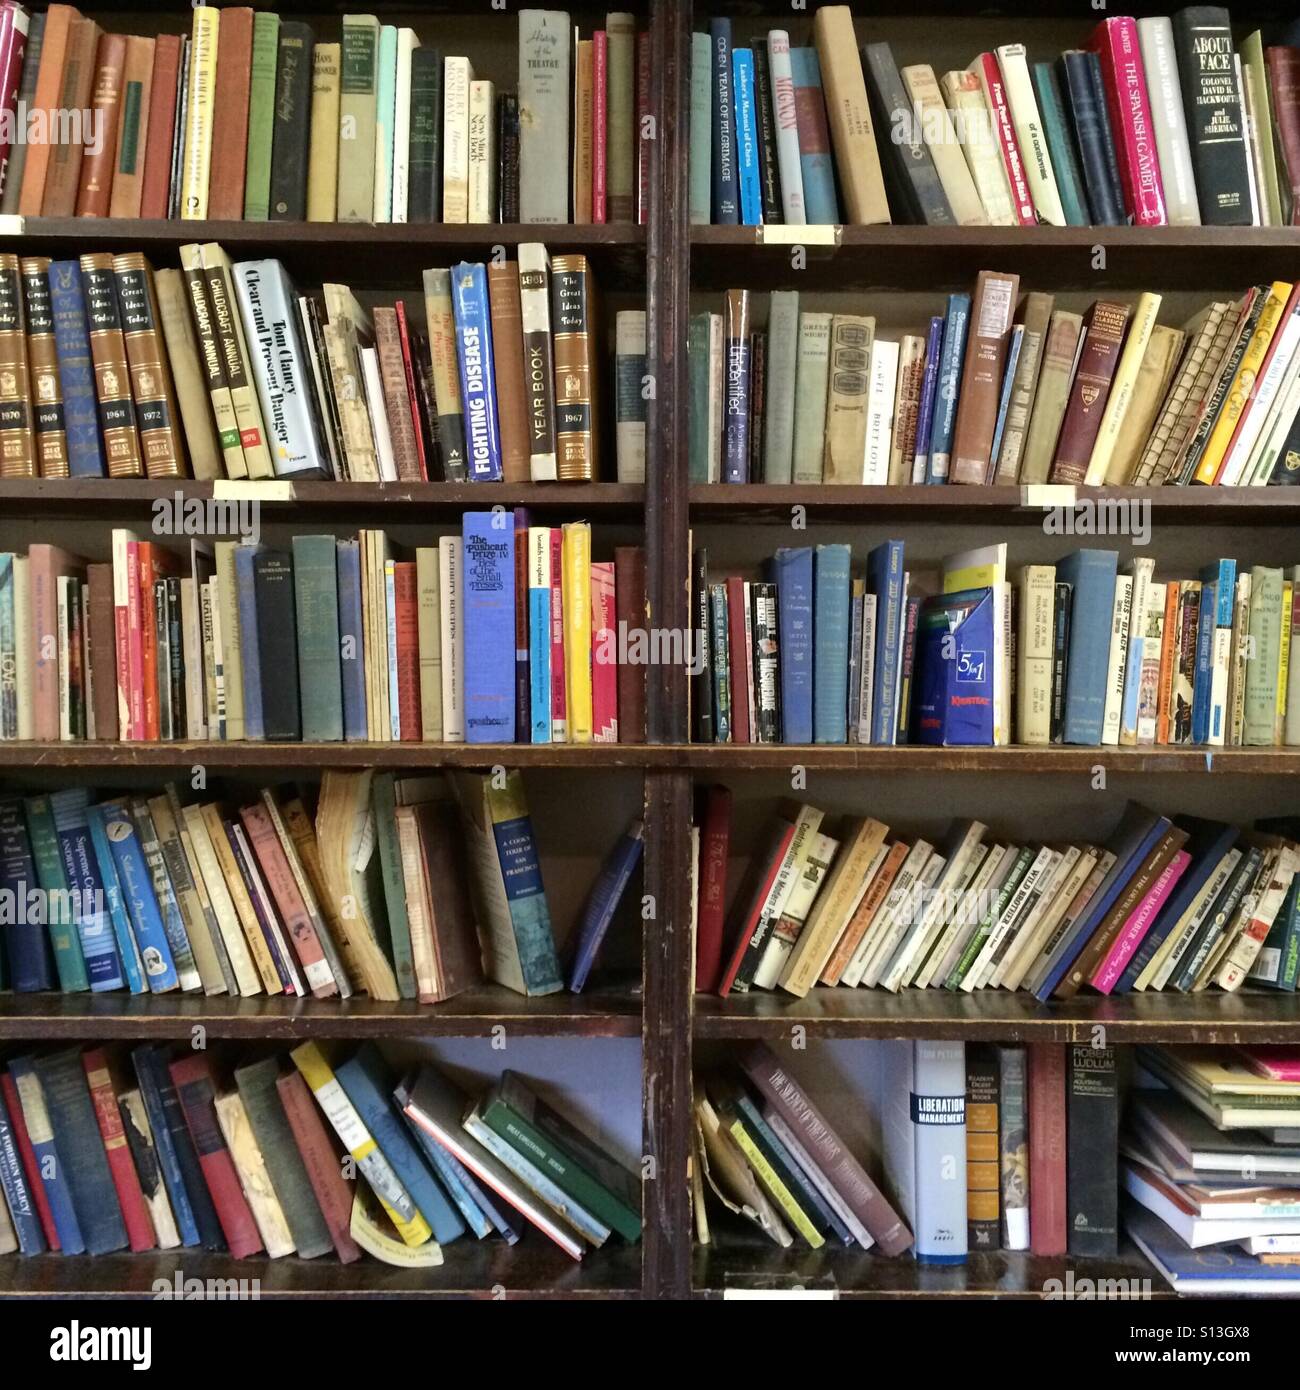 Bookshelf filled with old books. Stock Photo